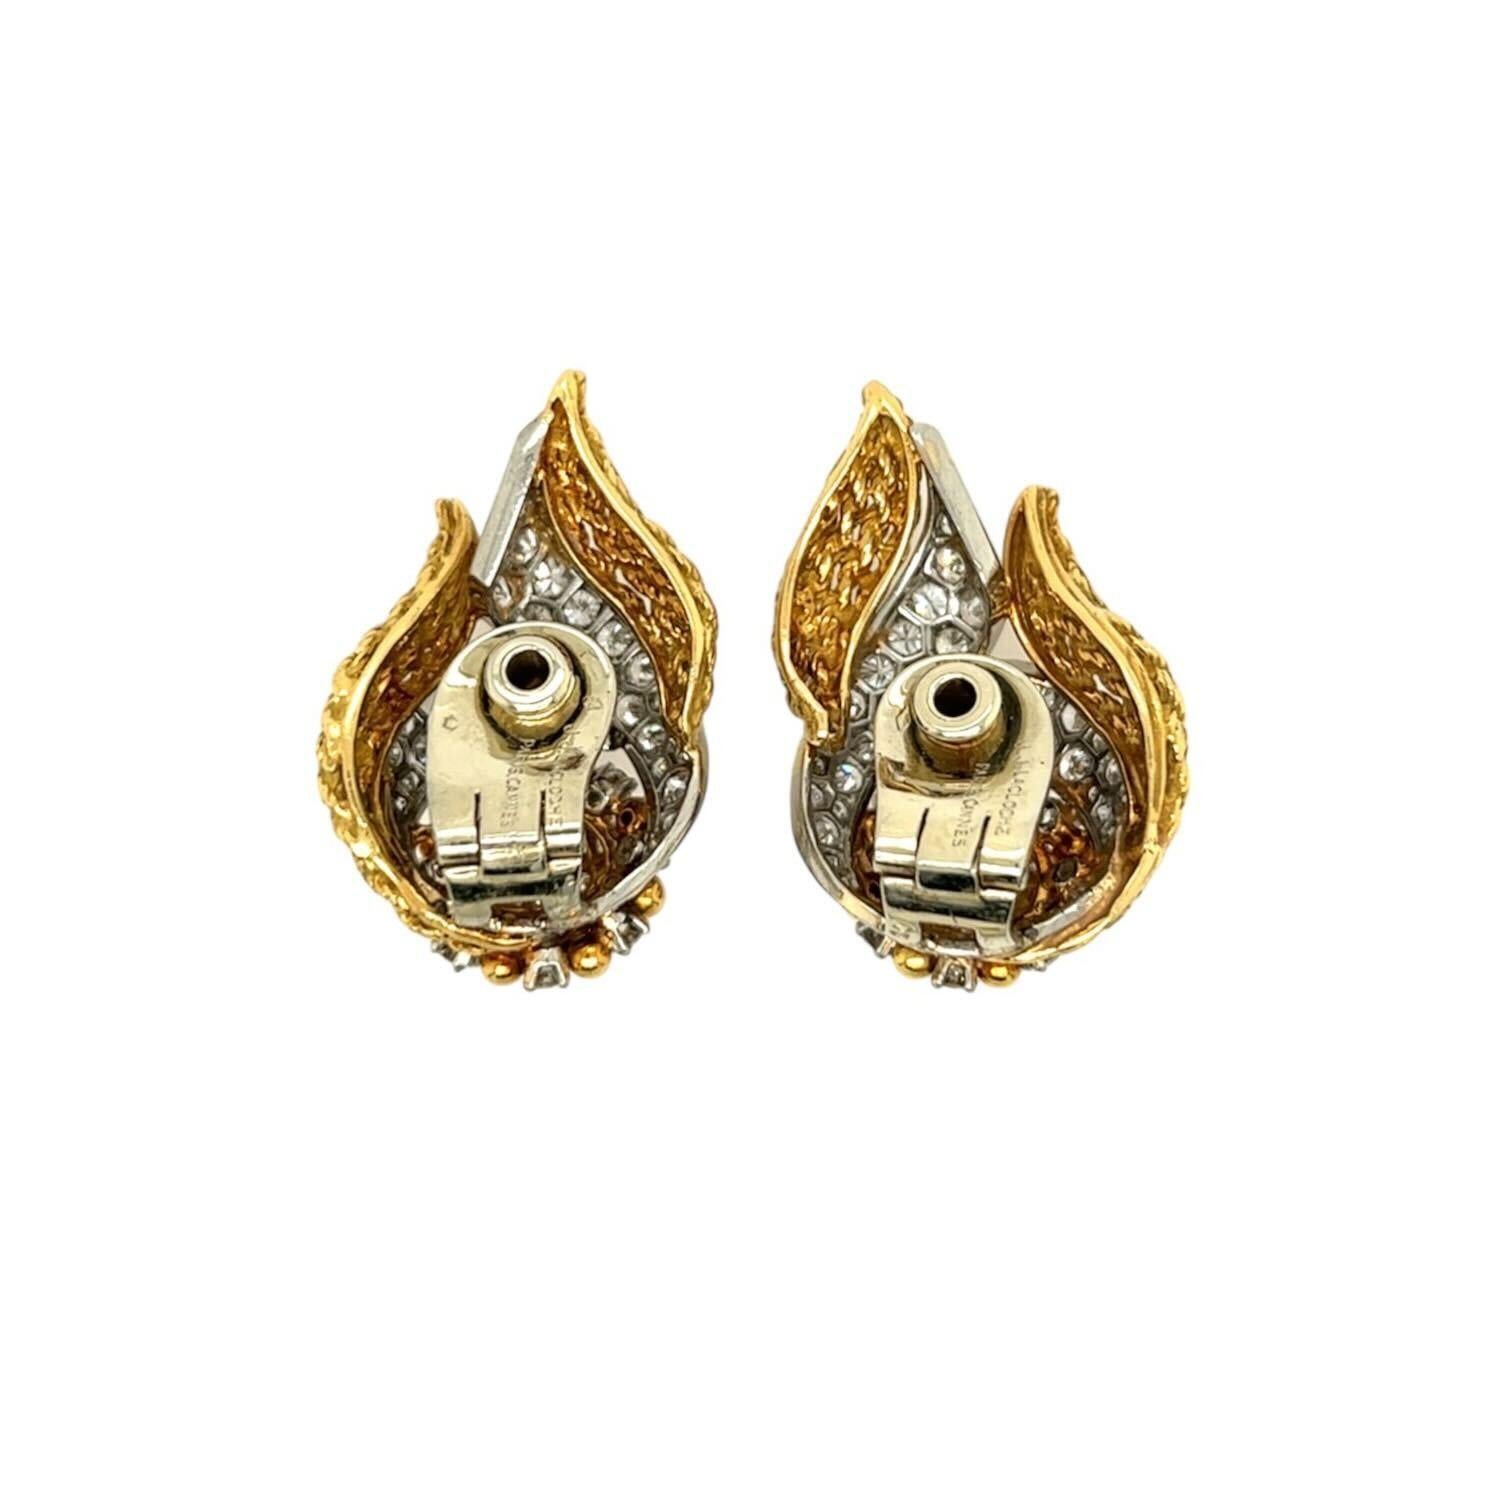 Round Cut LACLOCHE Yellow Gold, Platinum and Diamond Earrings